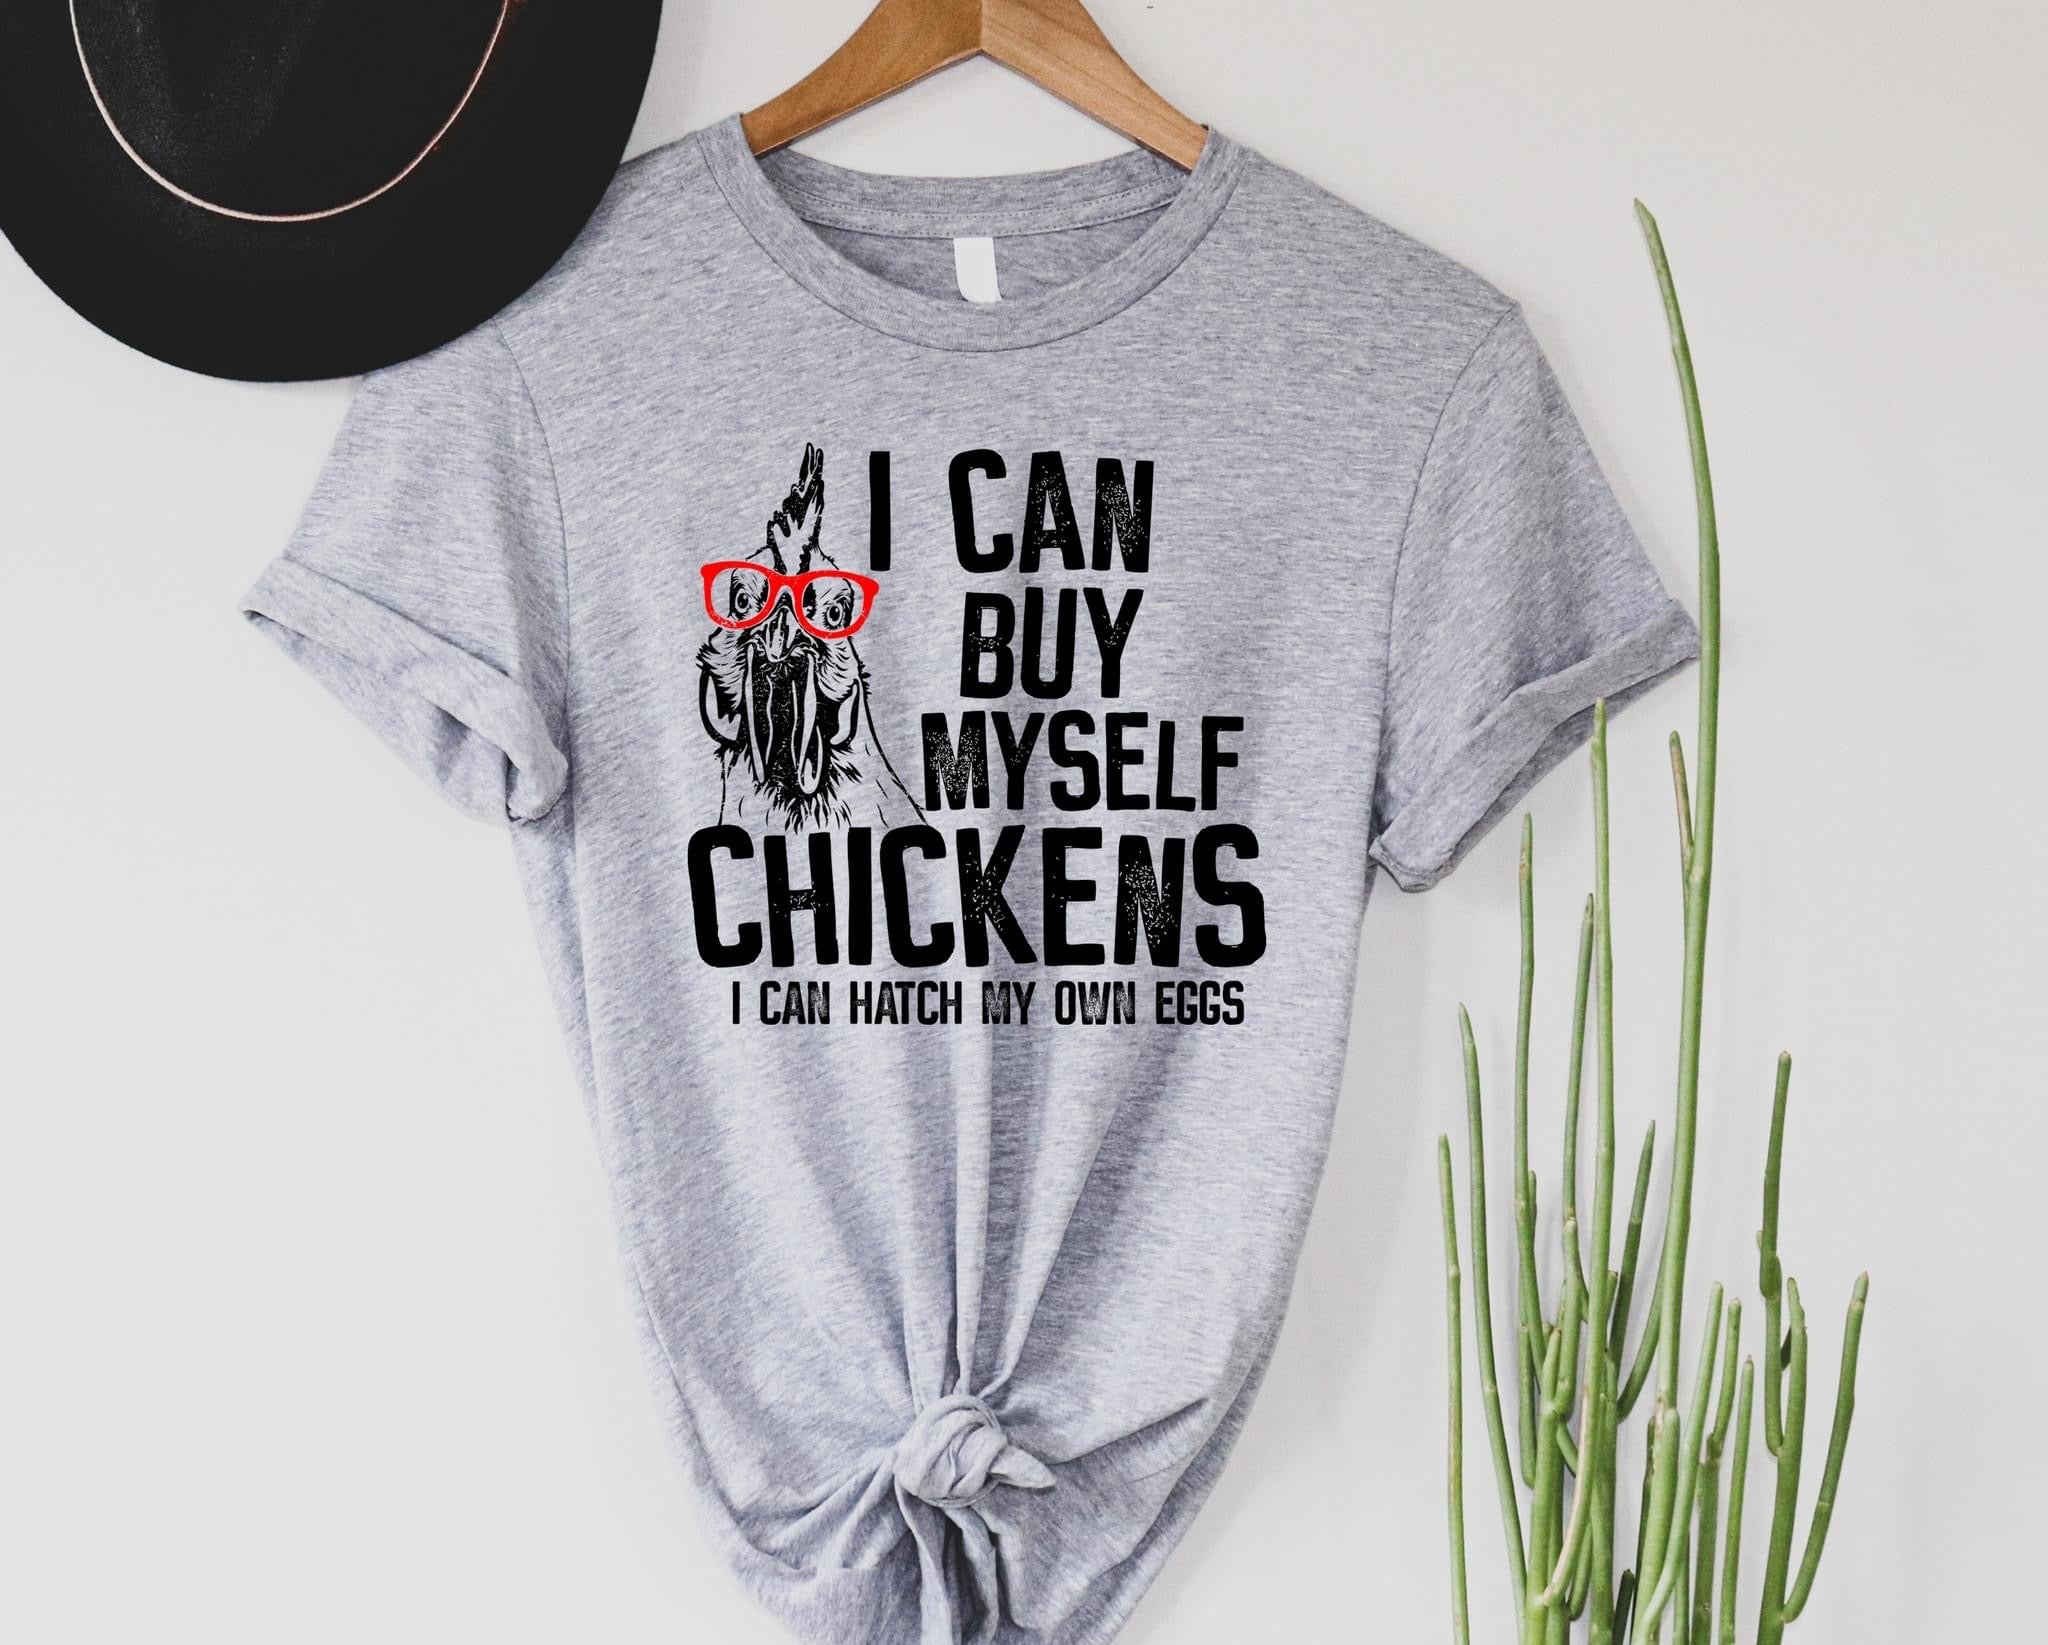 I can buy myself chickens tee!